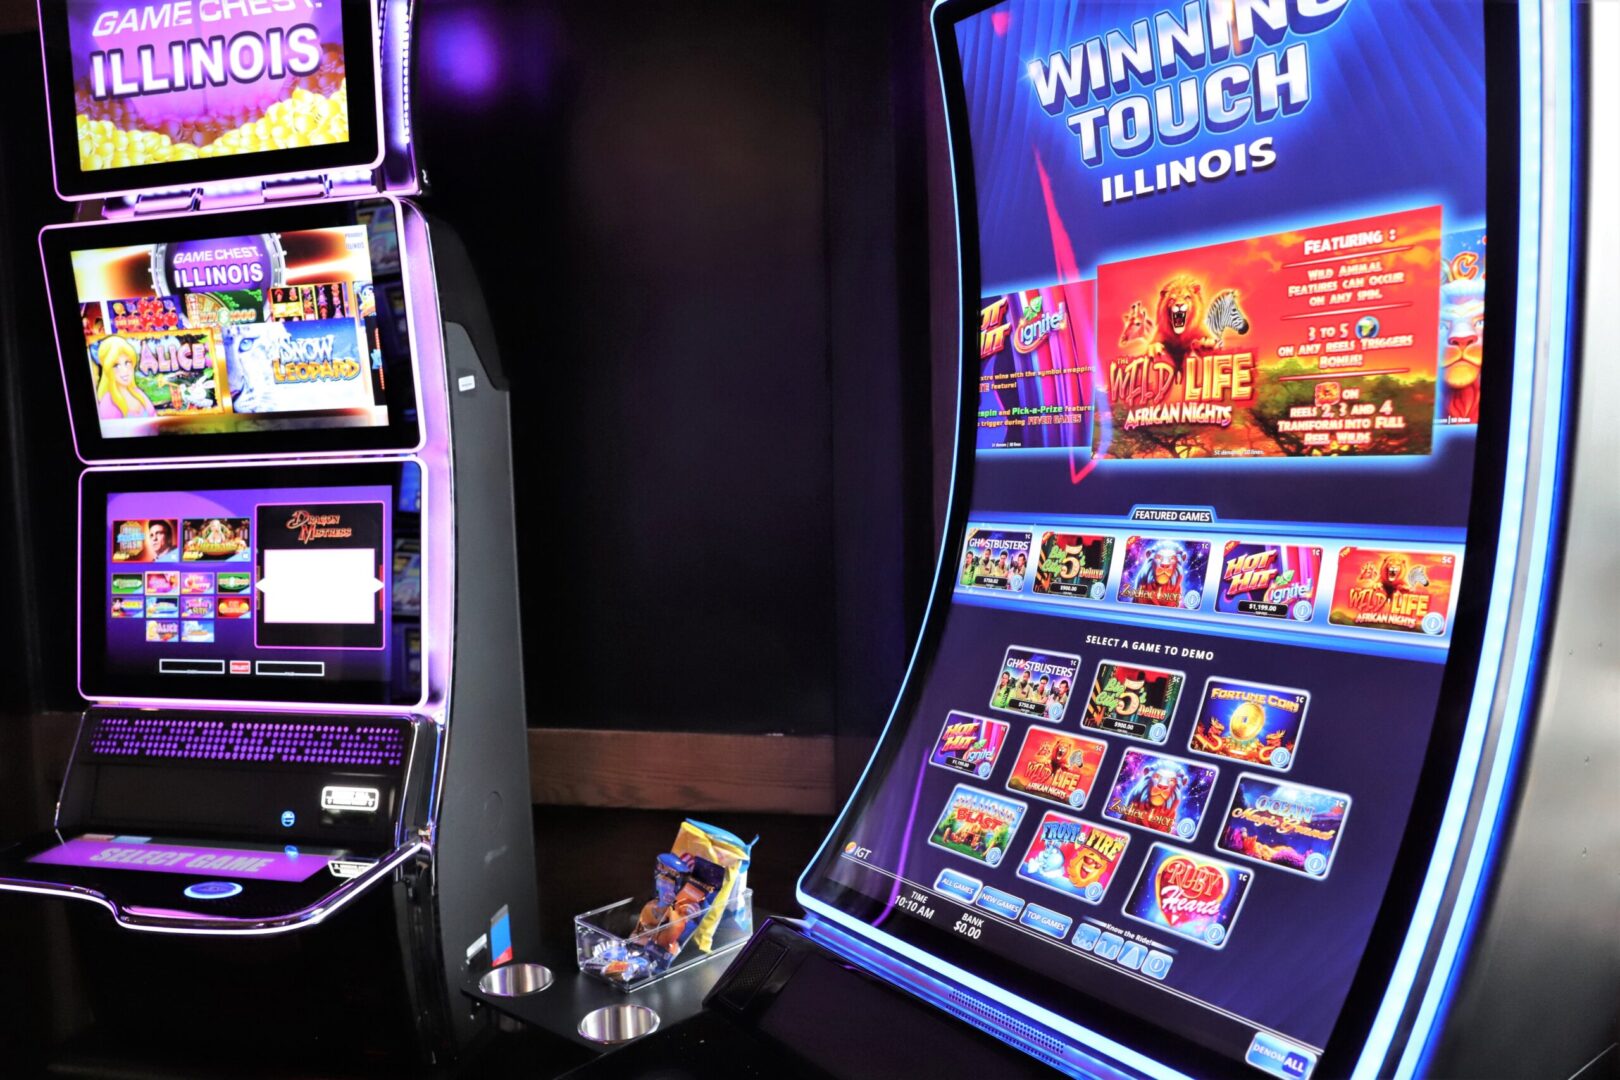 A slot machine with a large screen and many games.